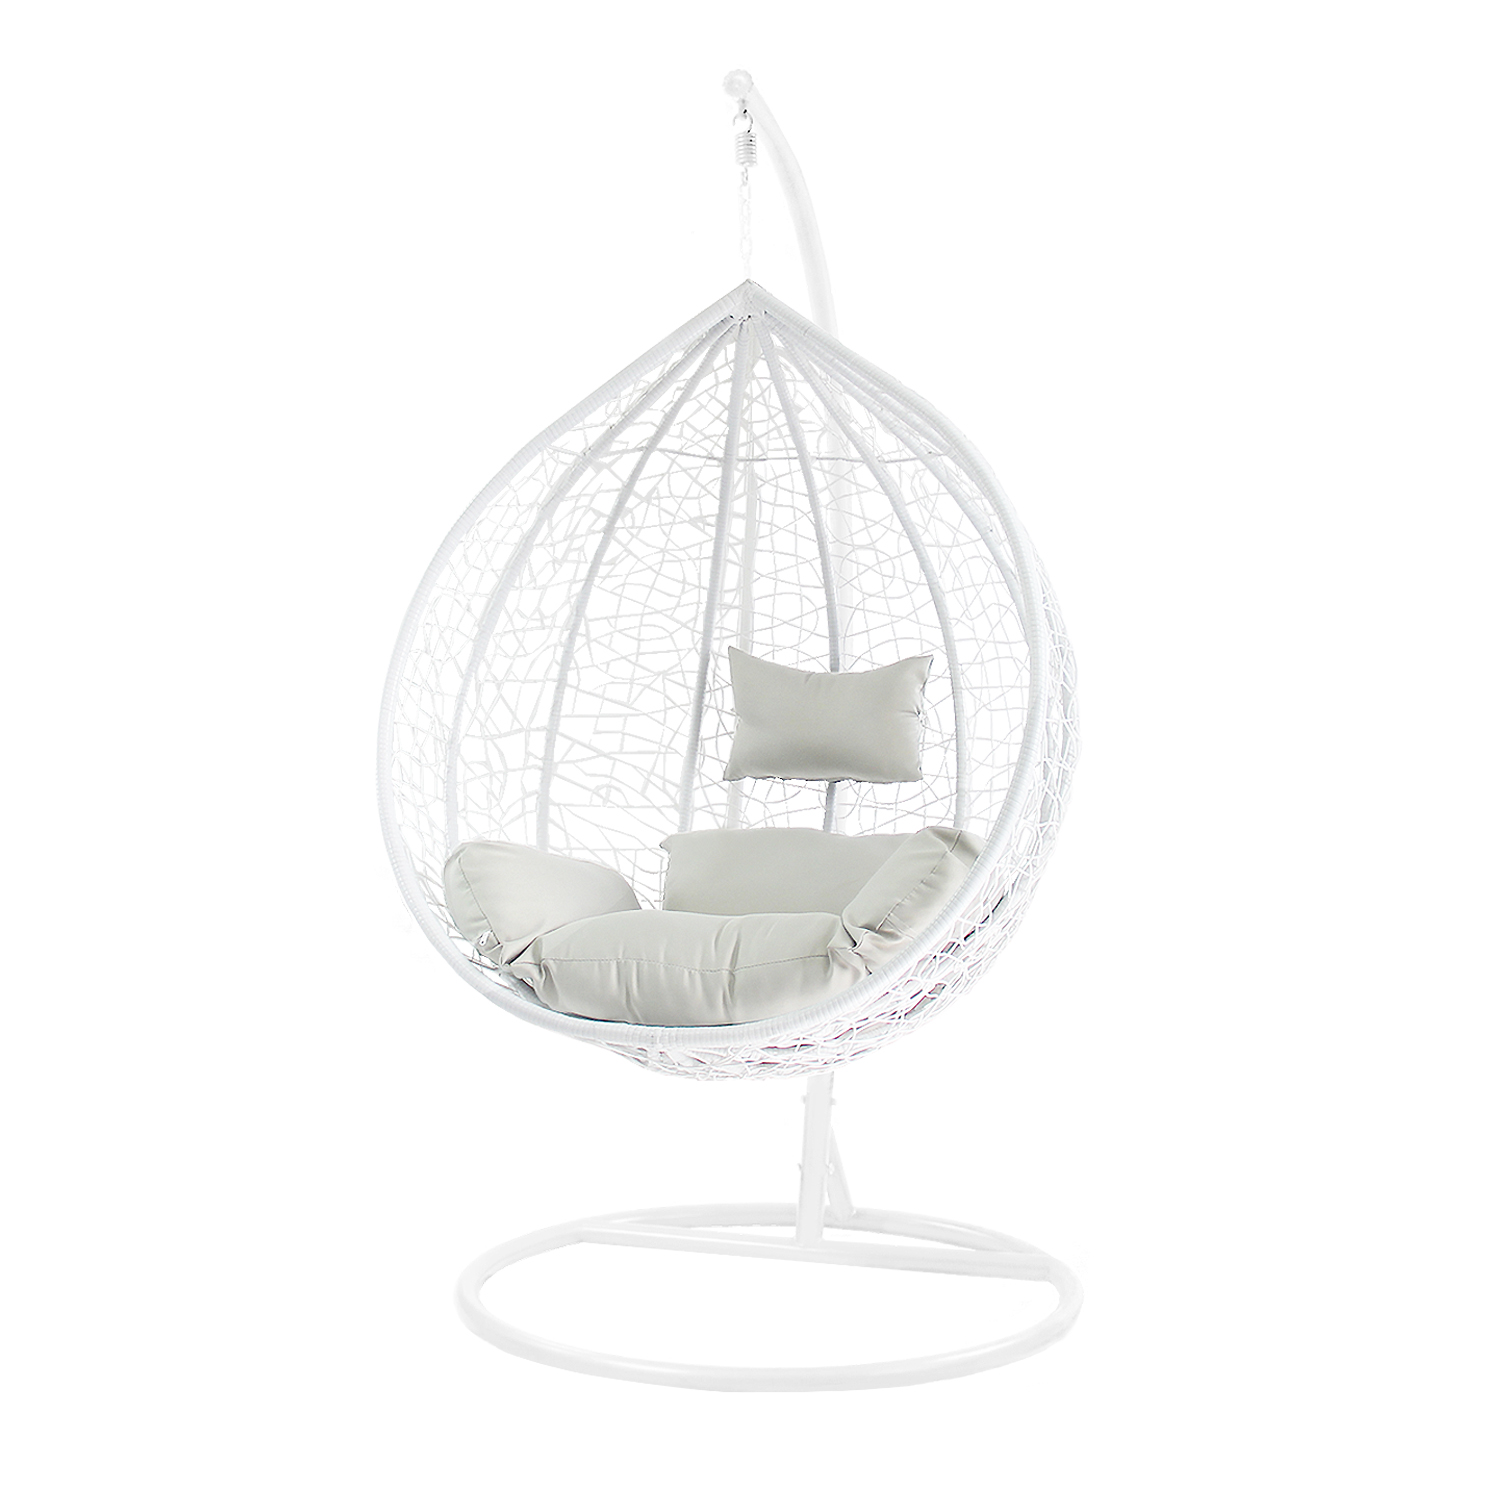 Patio Swing Chair Outdoor Wicker Tear Drop with Gray Cushion Snow White Living Room - image 4 of 8